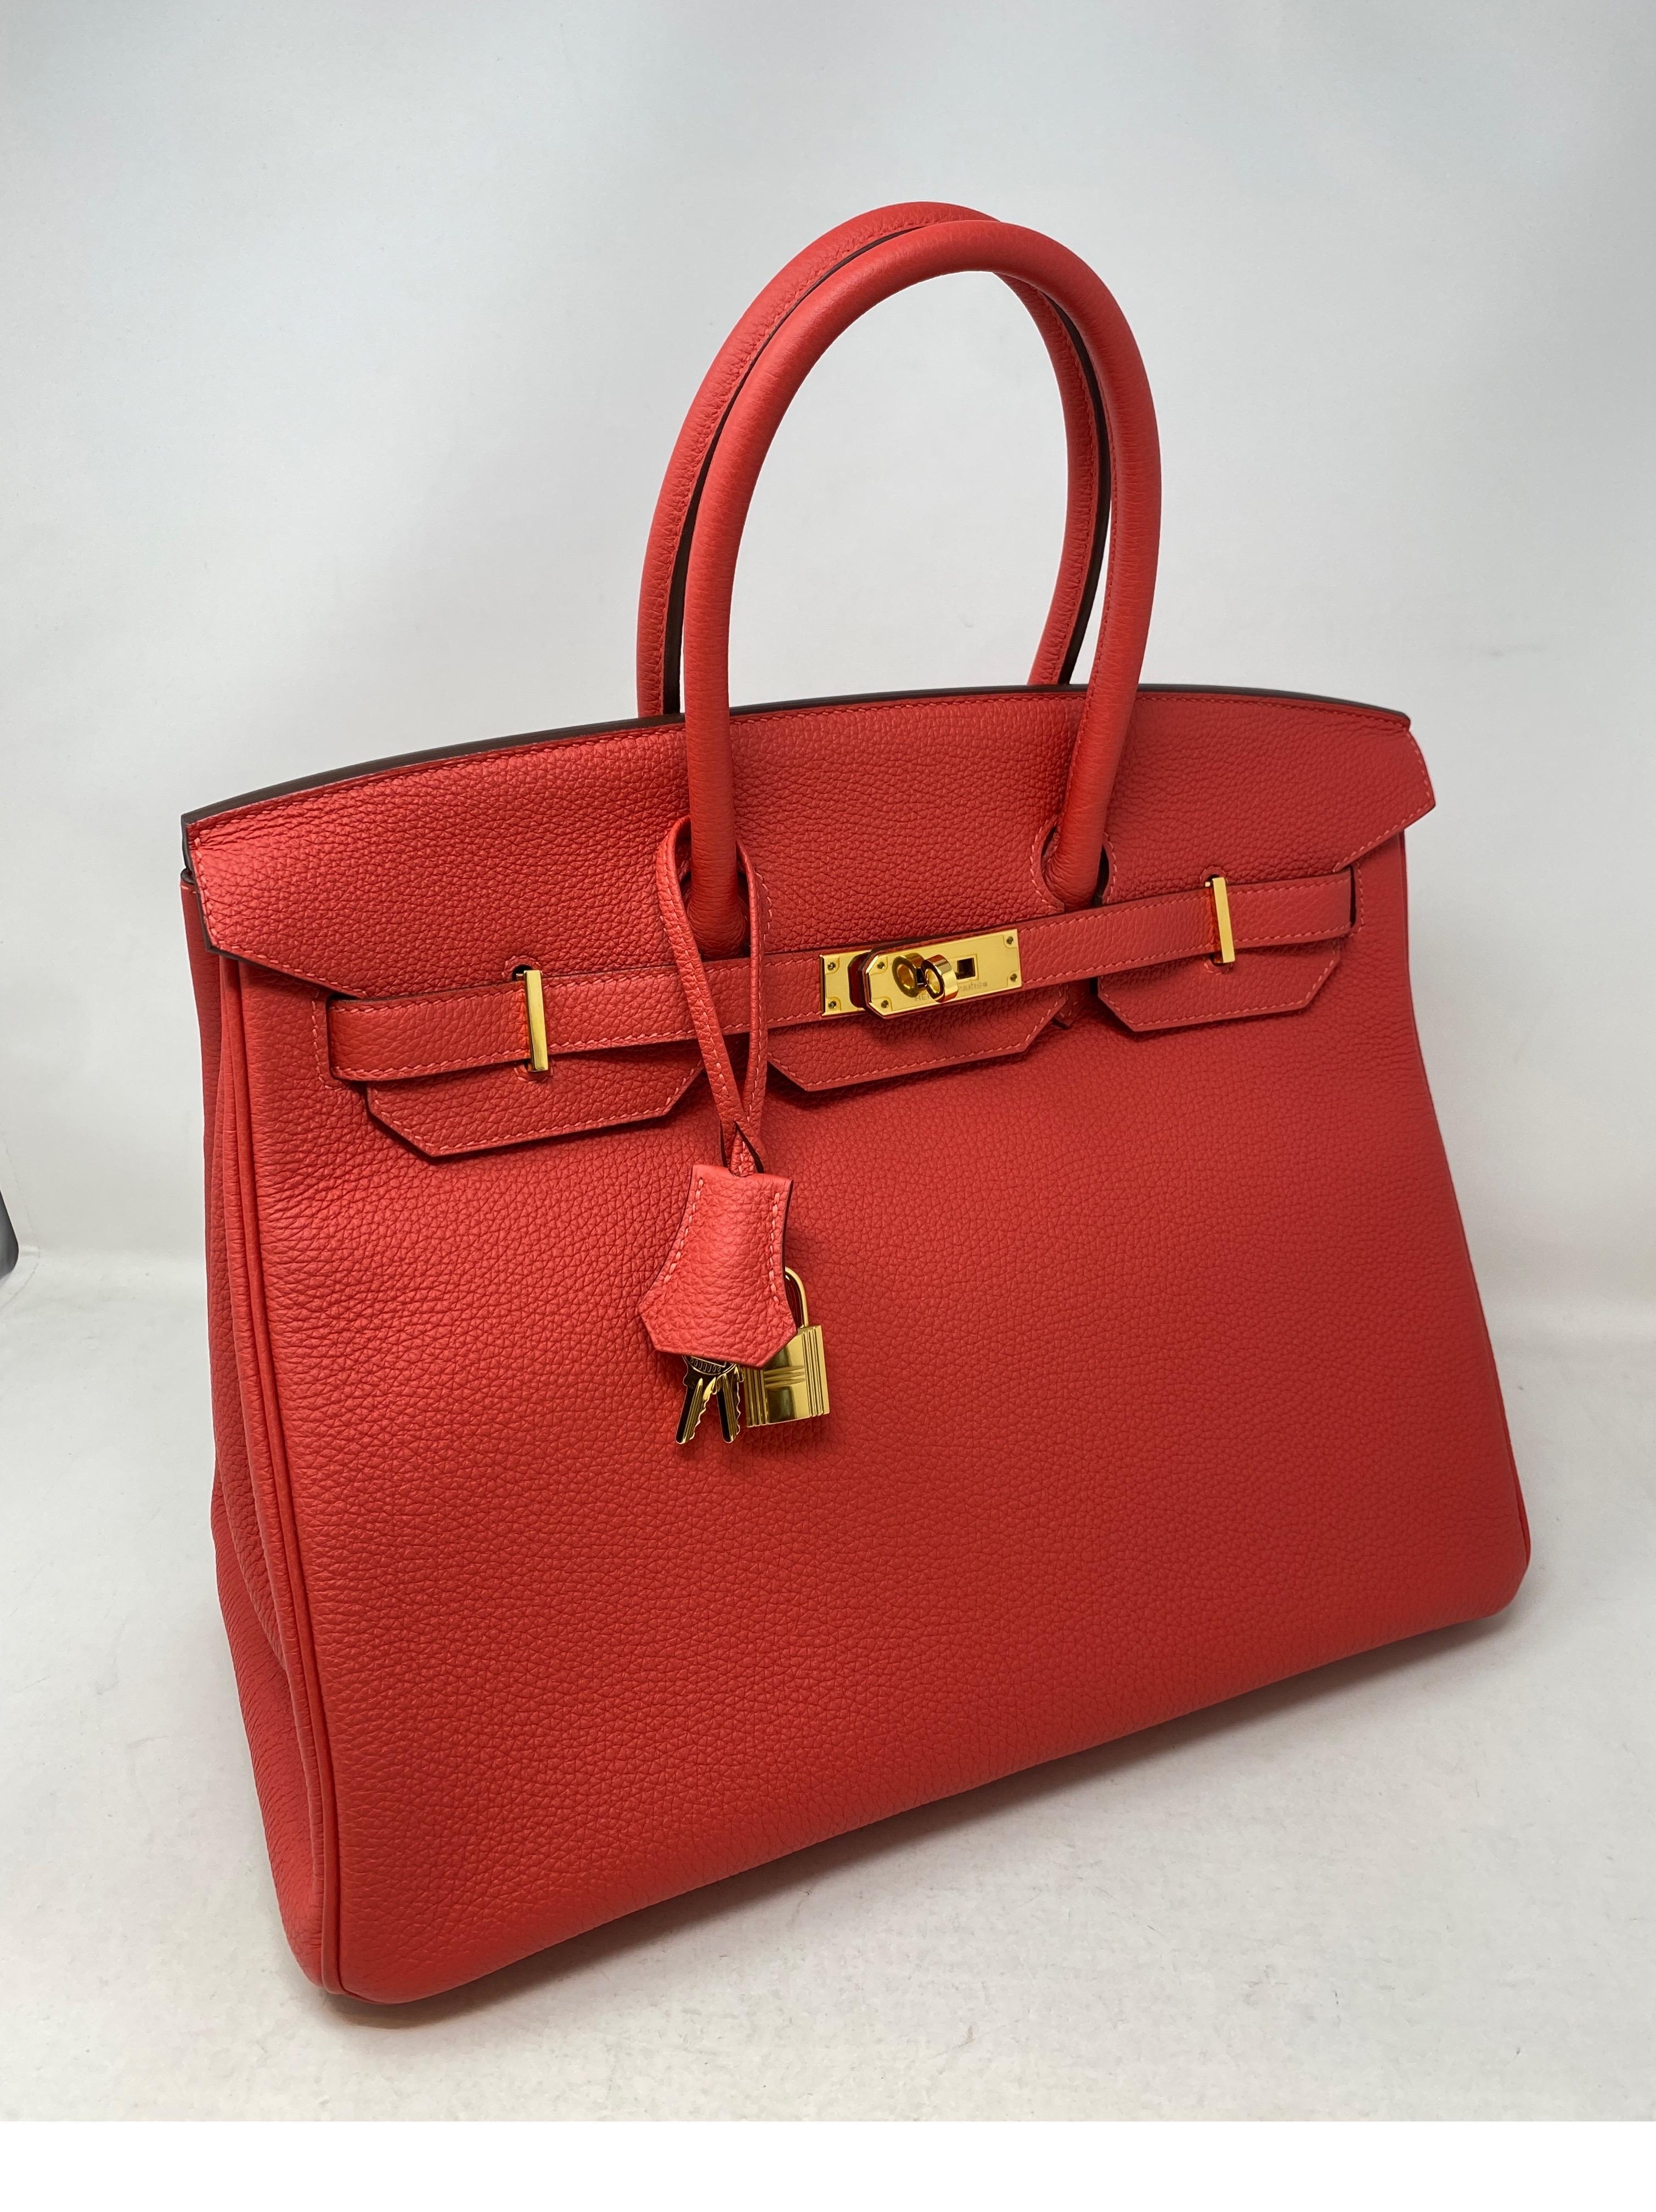 Hermes Rose Pivoine Birkin 35 Bag. Beautiful Spring and Summer color bag. Gold hardware. Rosy pink color. Gold hardware. Excellent condition looks new. Plastic is still on hardware. Includes clochette, lock, keys, and dust cover. Includes original